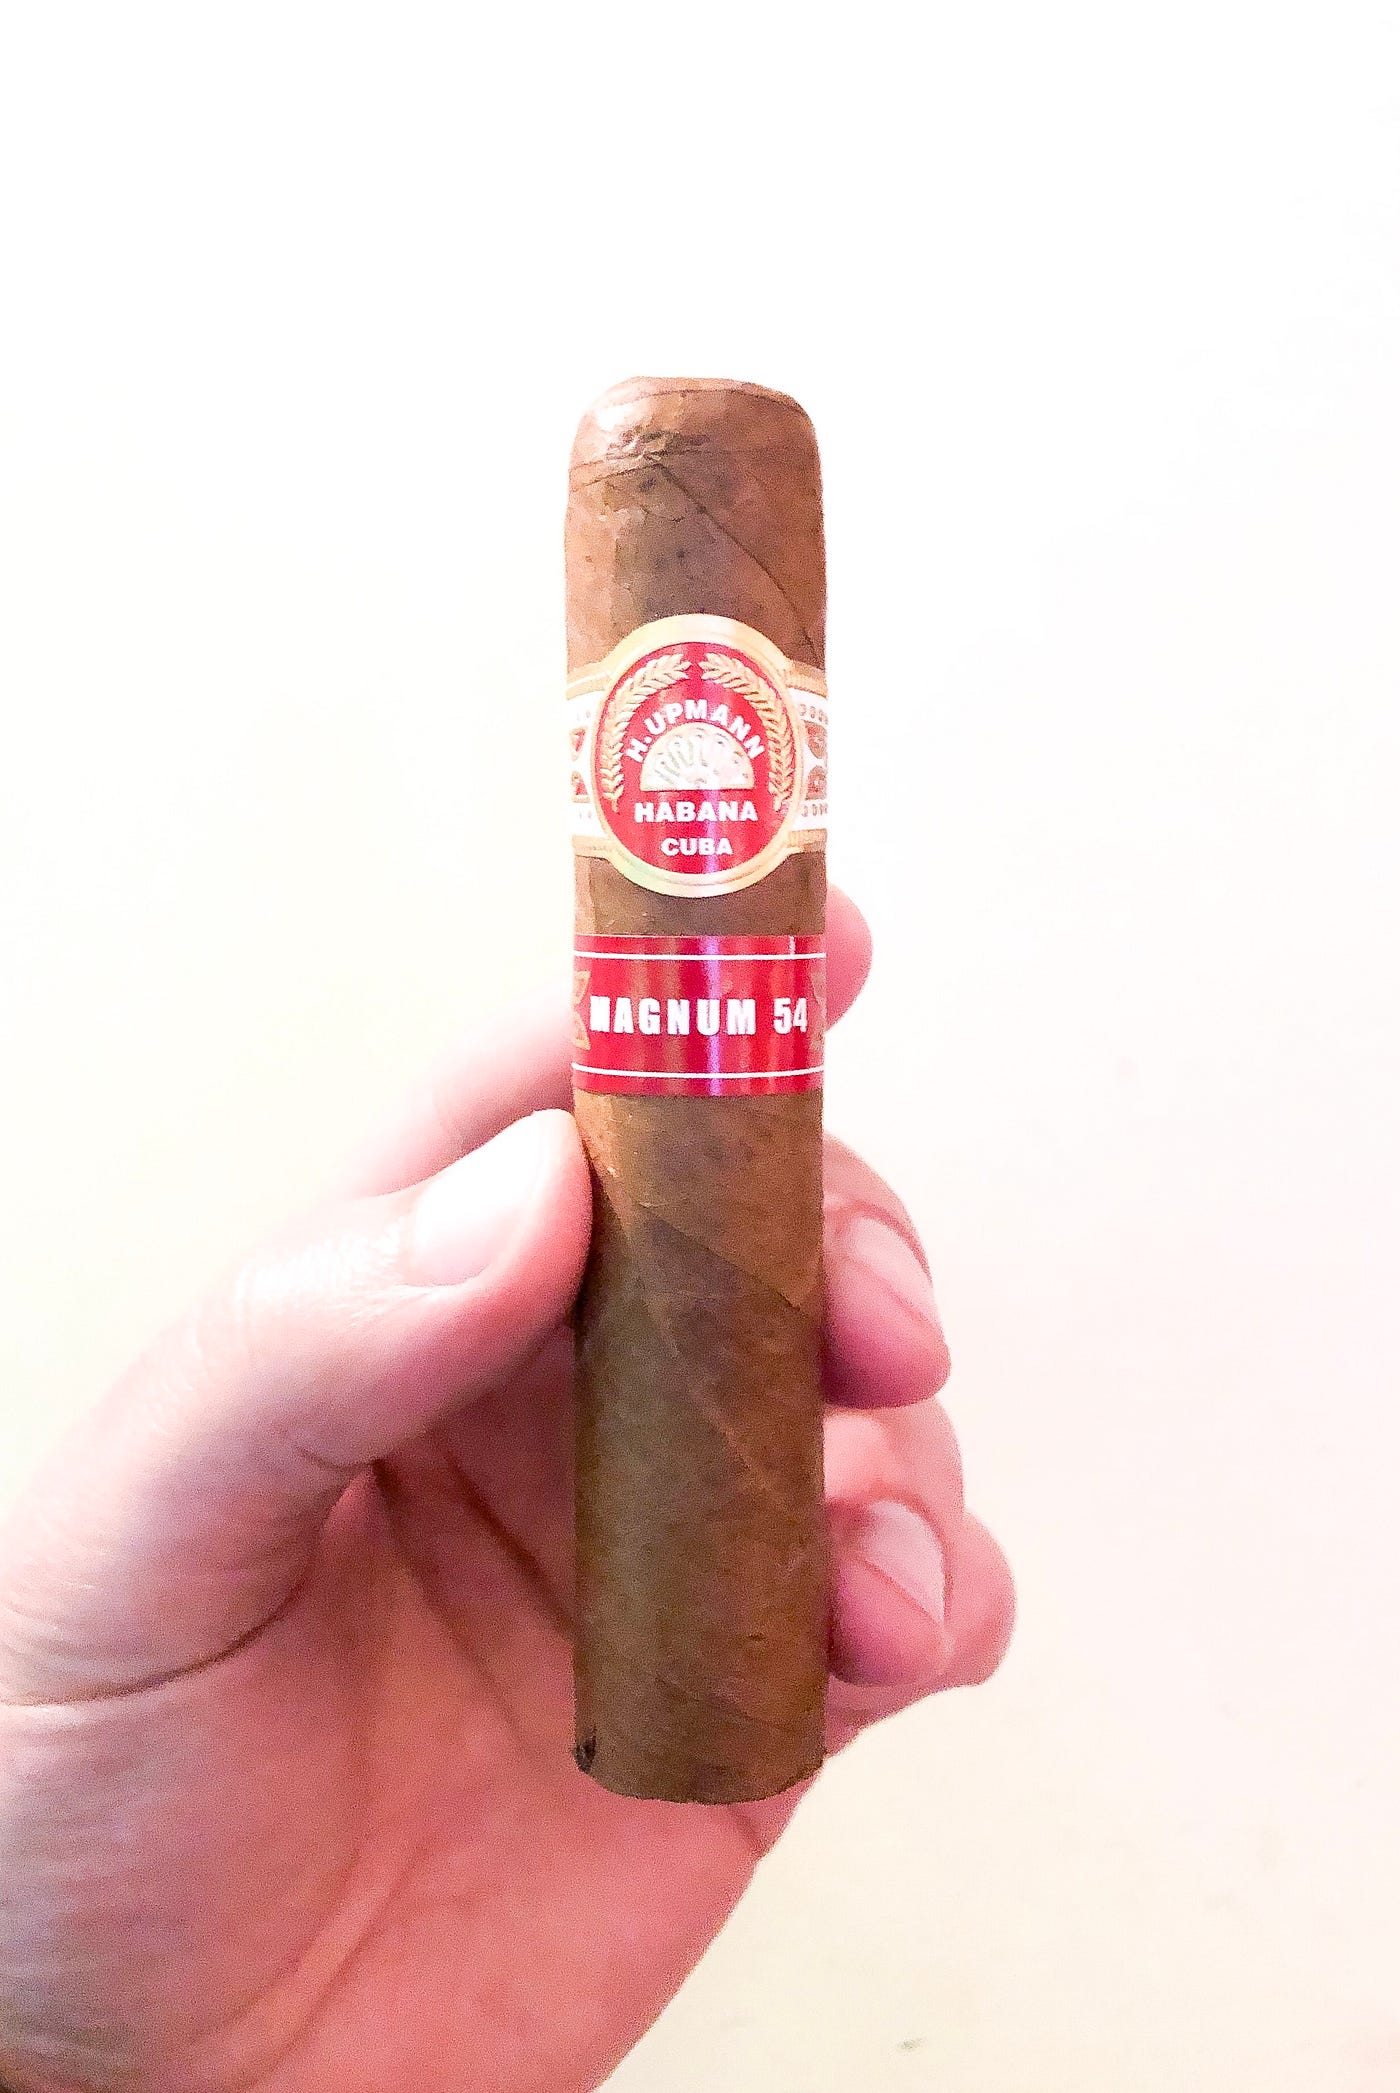 Top 15 Cuban Cigars to have on your humidor., by All Things Cigars